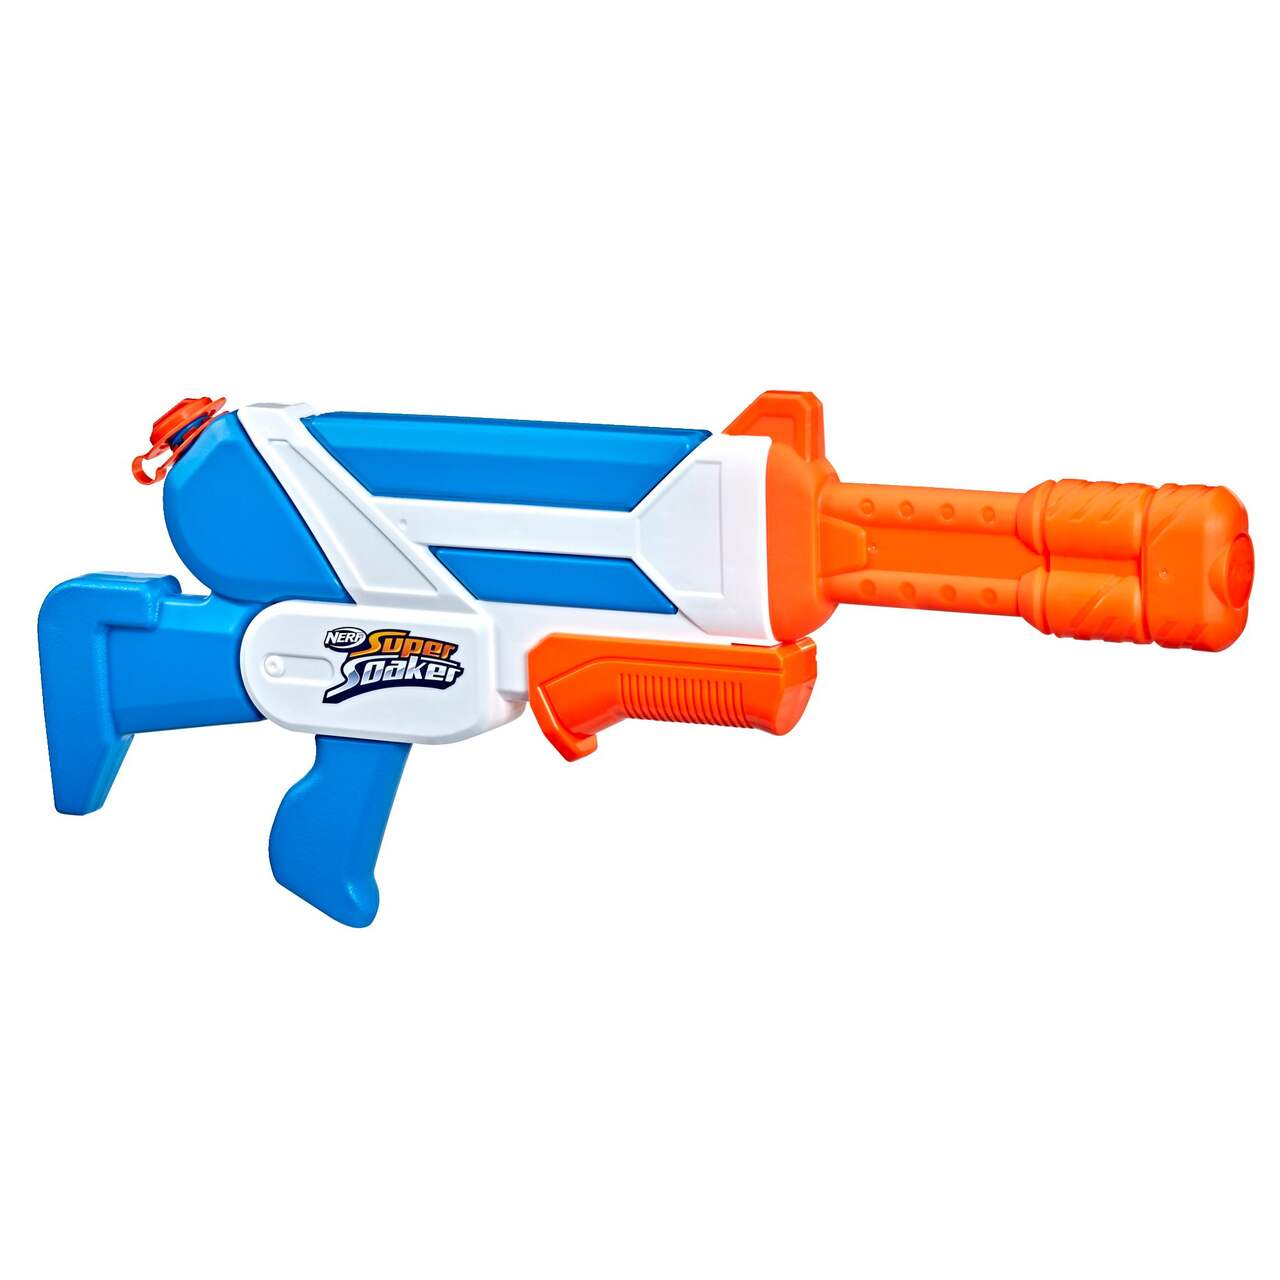 NERF Super Soaker Twister Water Blaster Toy with 2 Twisting Streams of  Water, 37-oz, Age 6+